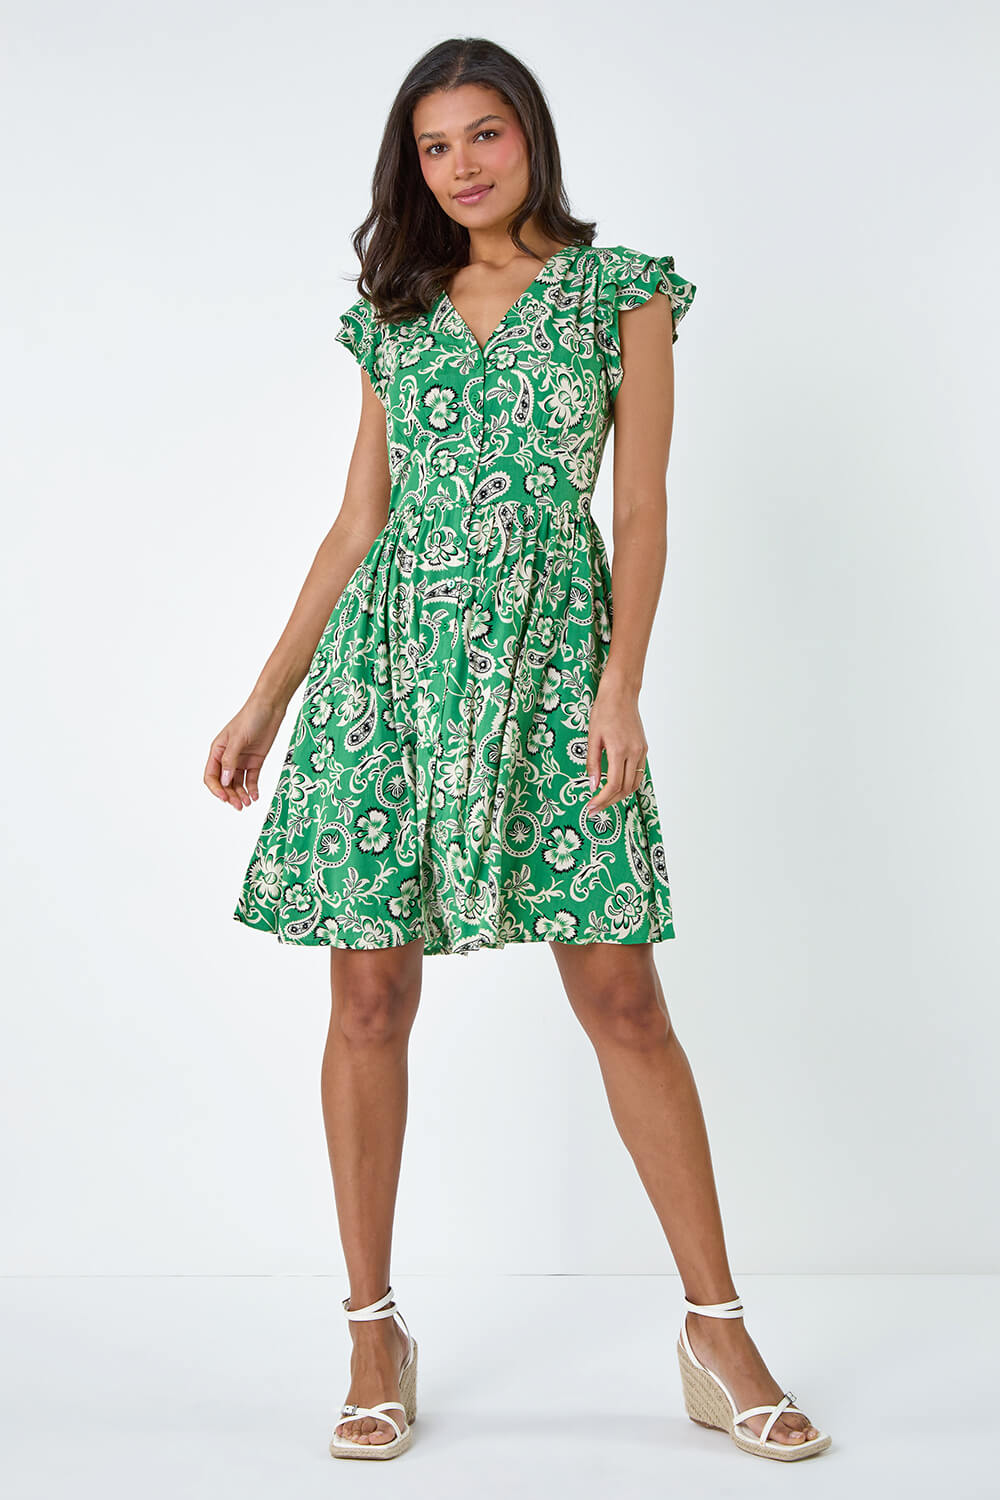 Green Paisley Floral Print Frill Dress, Image 2 of 5